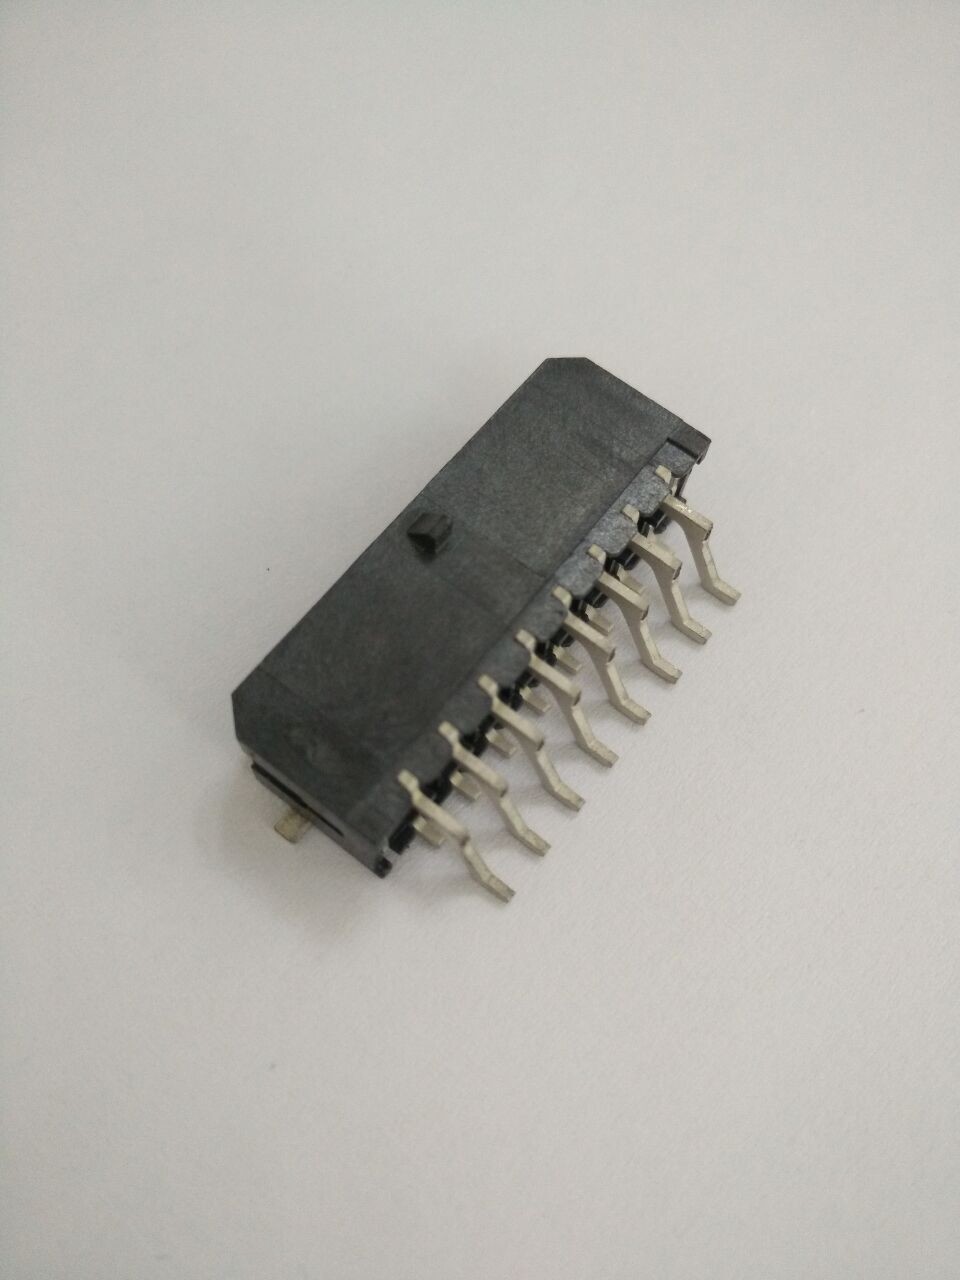 PCB Board Connector With Solder Tab Tin